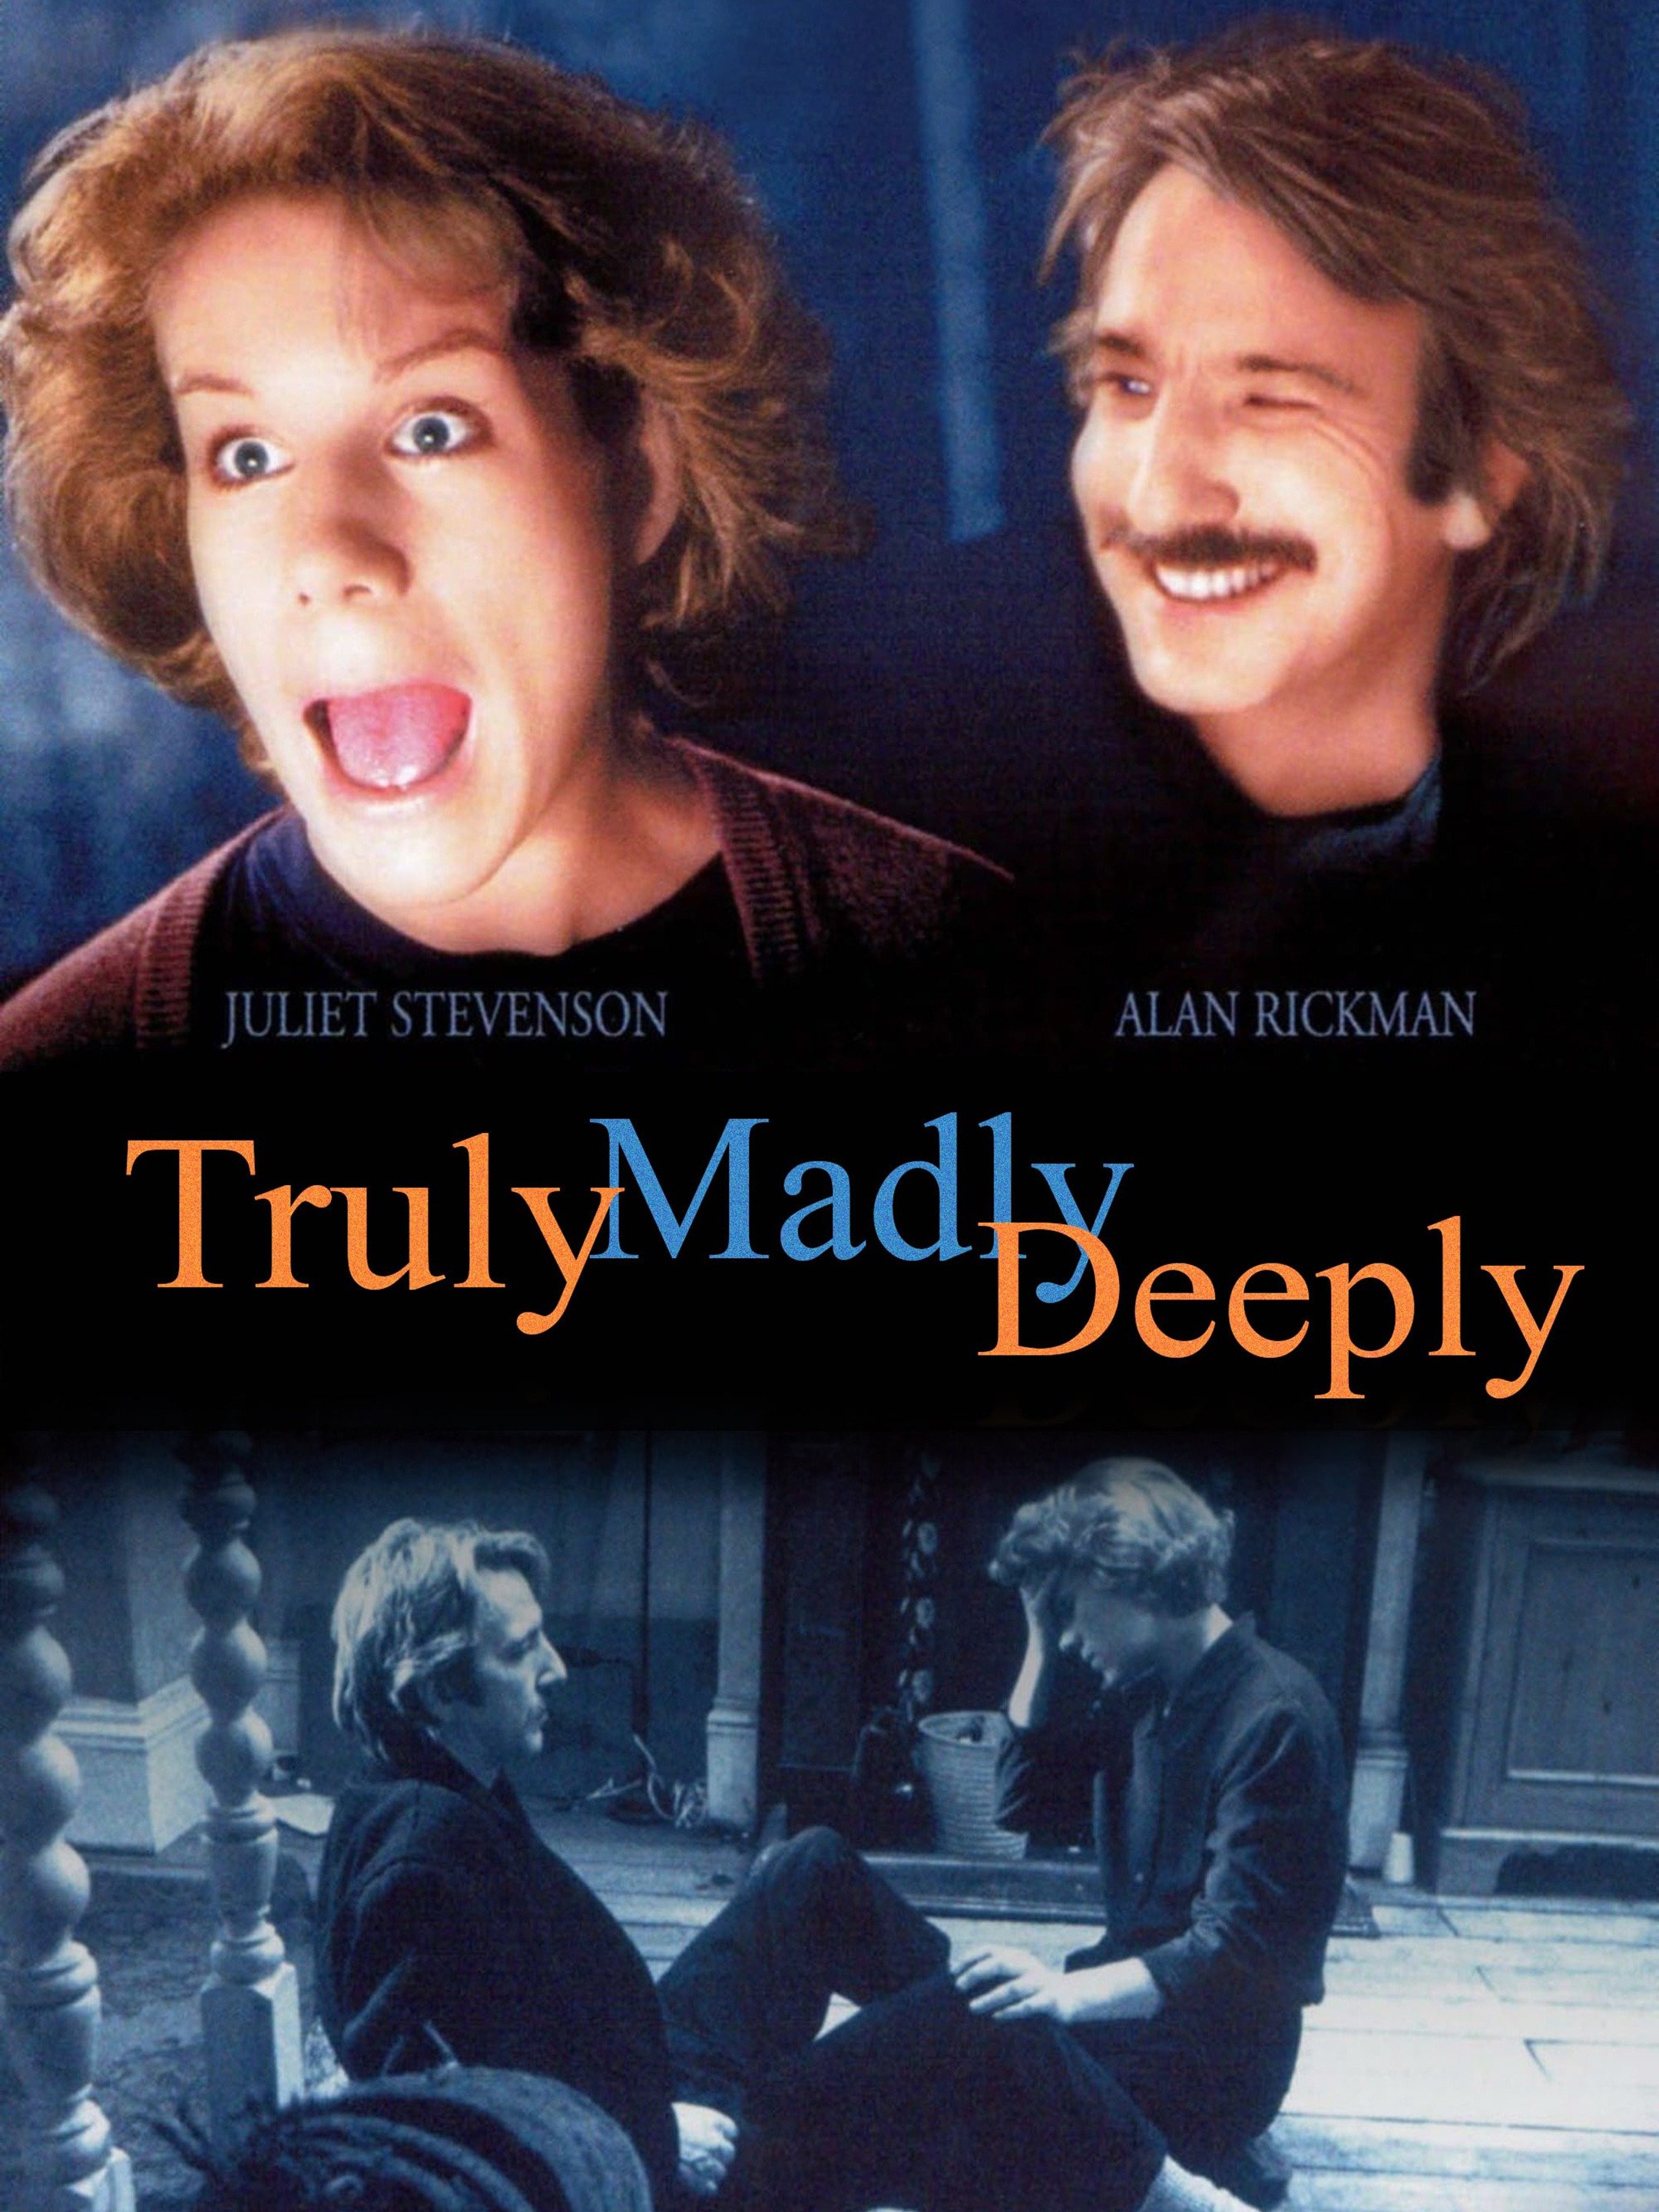 Truly, Madly, Deeply (1991) - Rotten Tomatoes